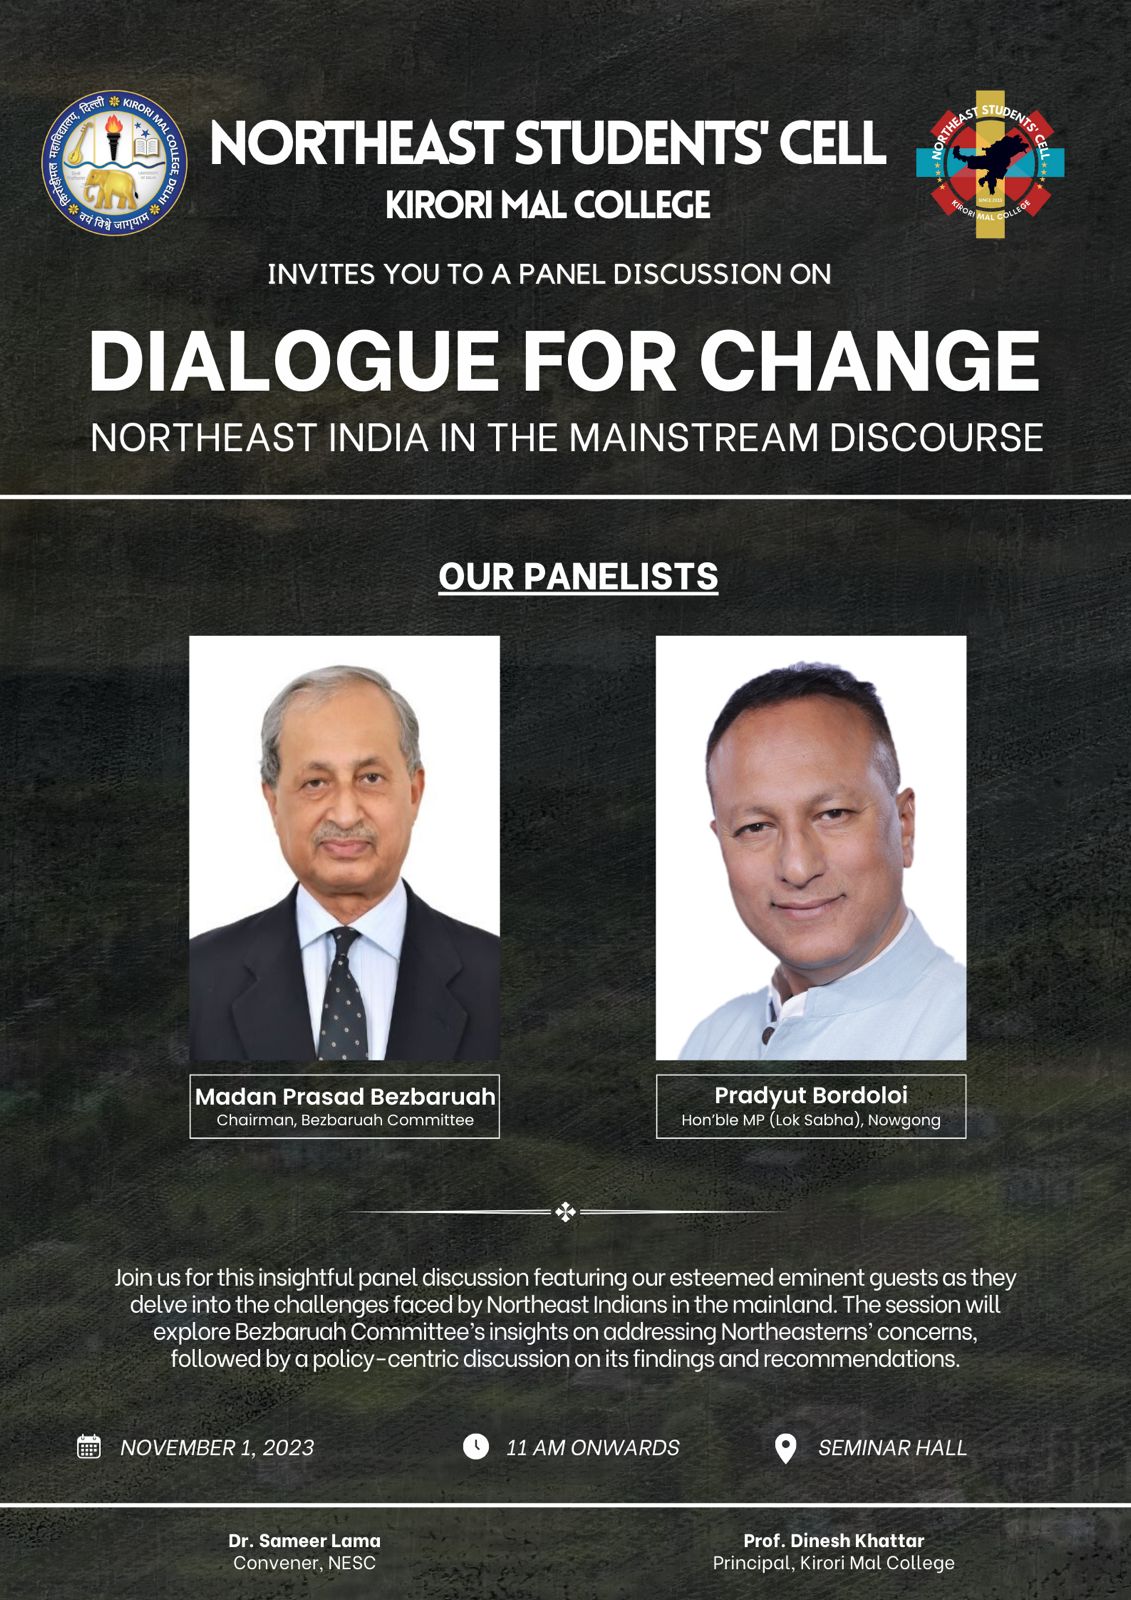 Dialogue for Change: Northeast India in the Mainstream Discourse,